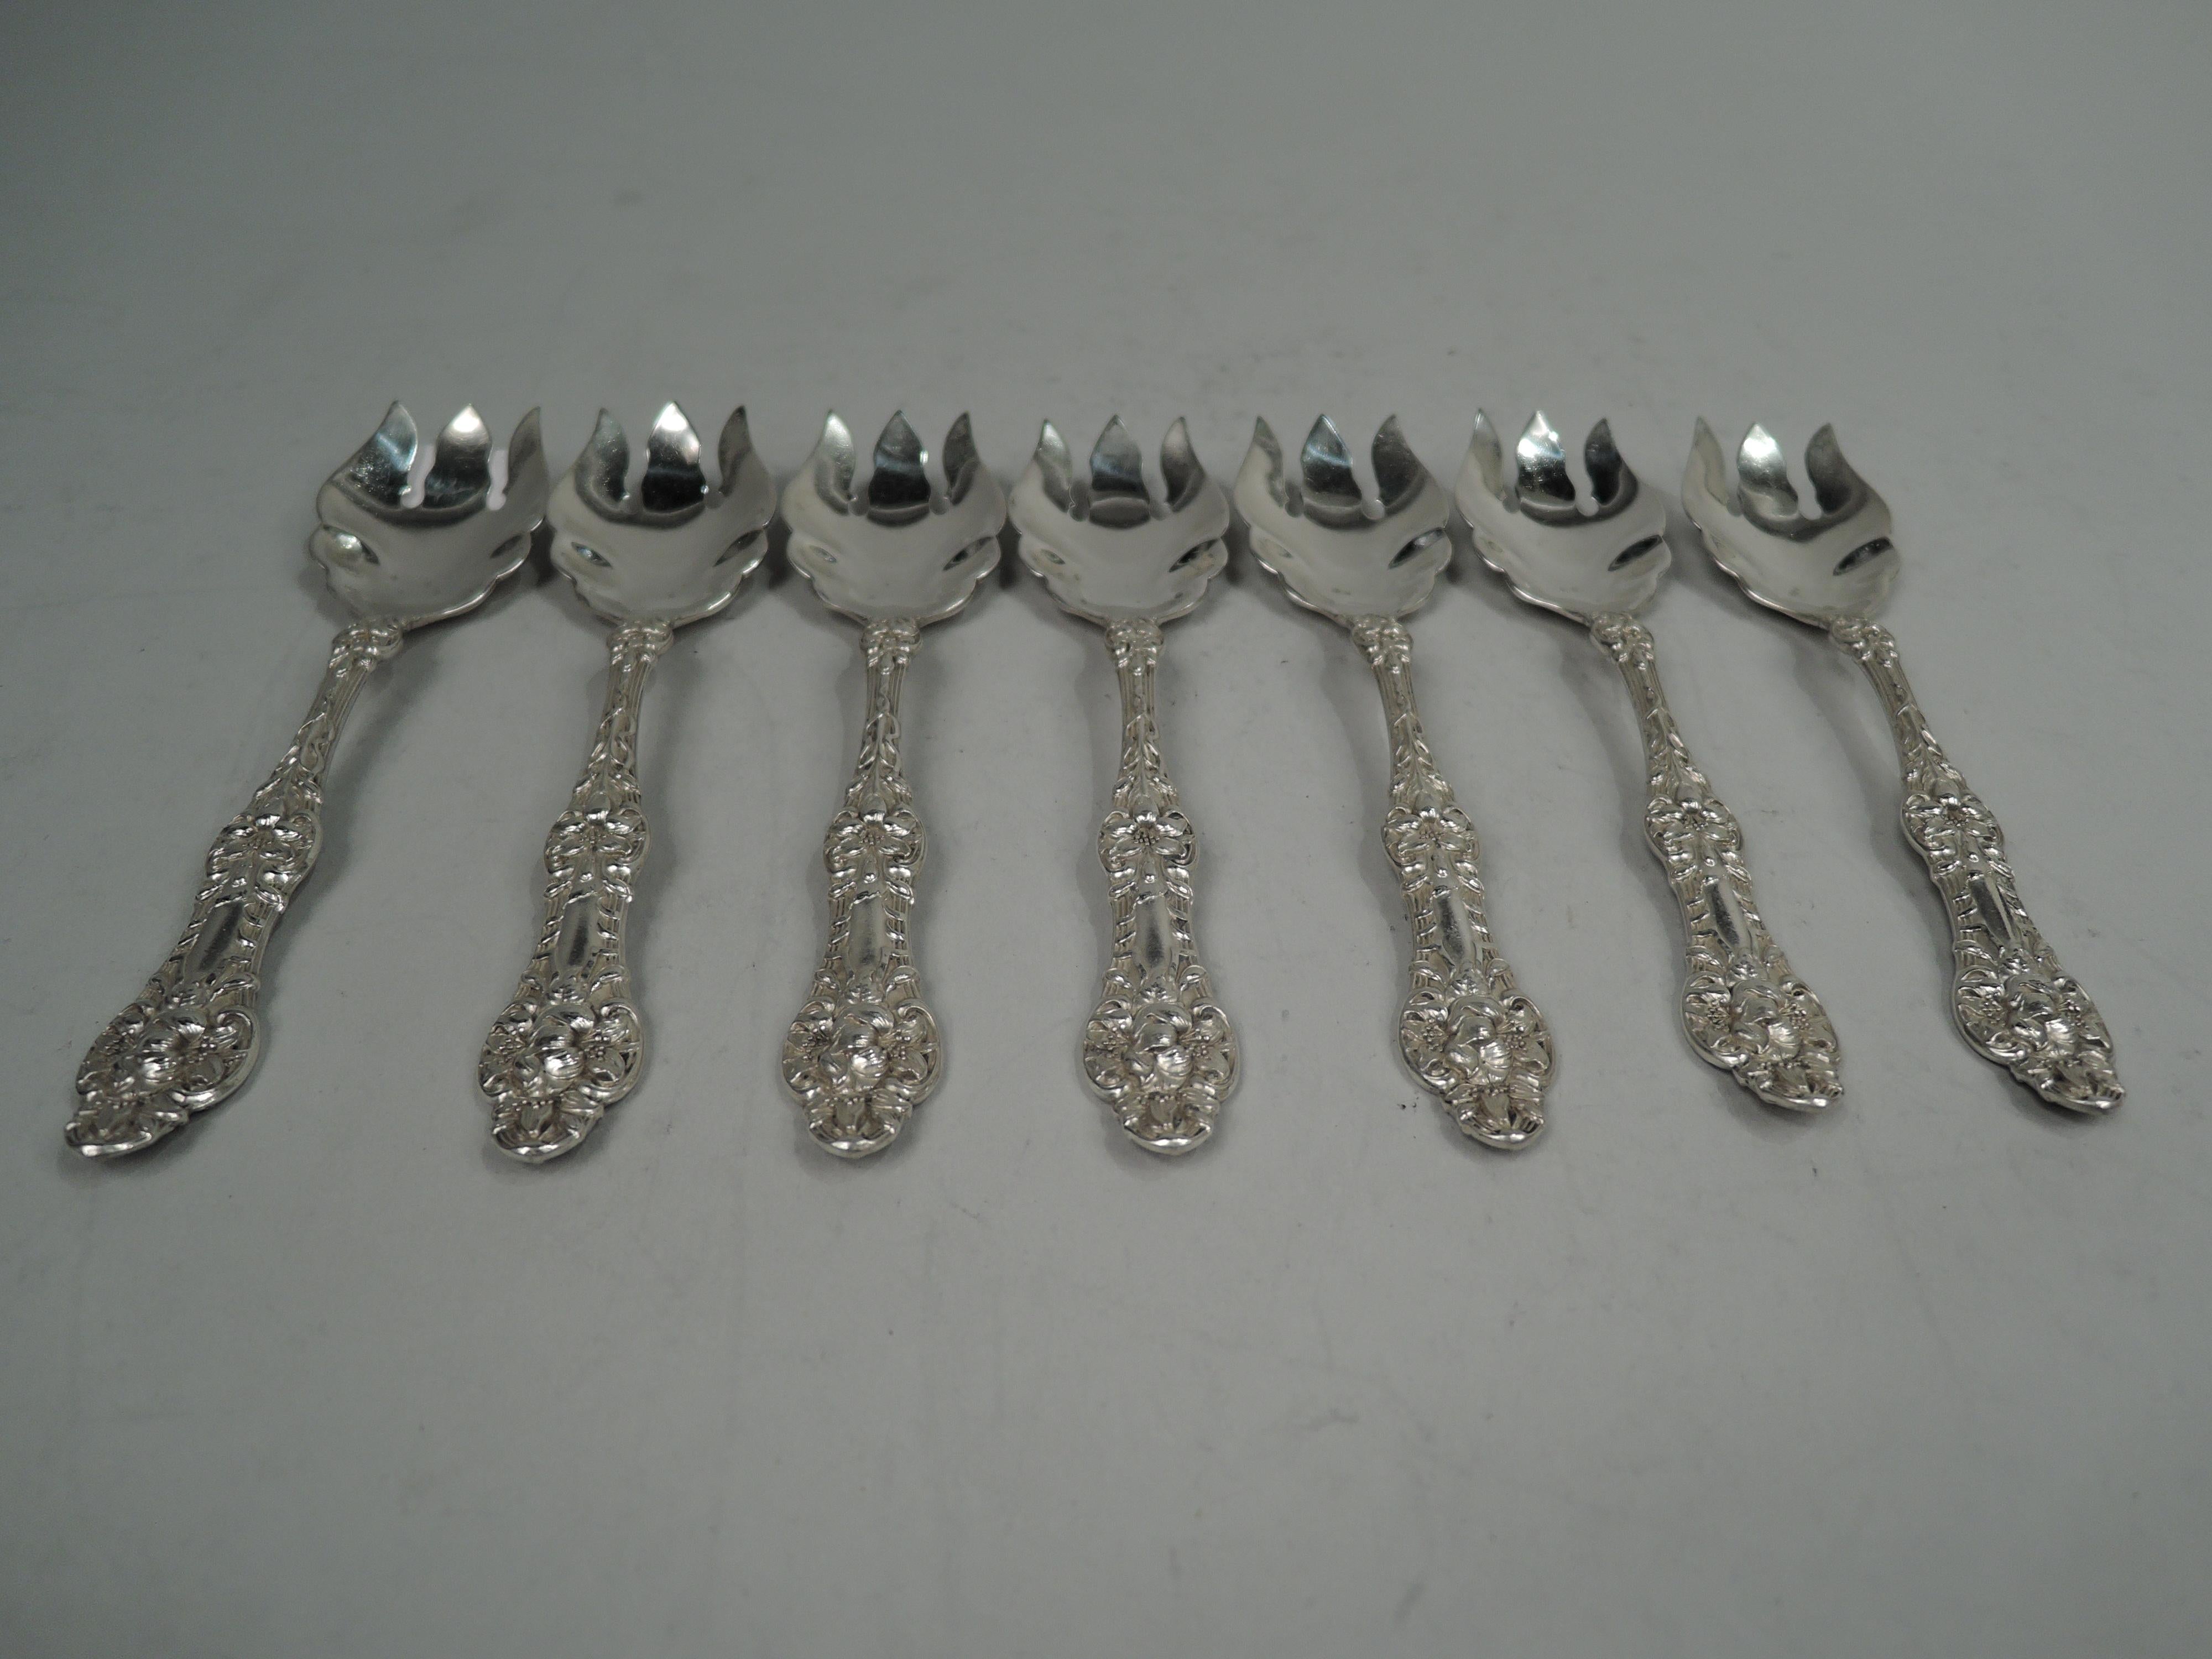 Set of 7 Orange Blossom sterling silver ice cream forks. Made by Alvin Corporation in Providence, ca 1910. Each: Deep and scrolled 3-tine shank; floral ornament on scrolled and reeded stem with trefoil terminal. Fully marked including maker’s stamp.